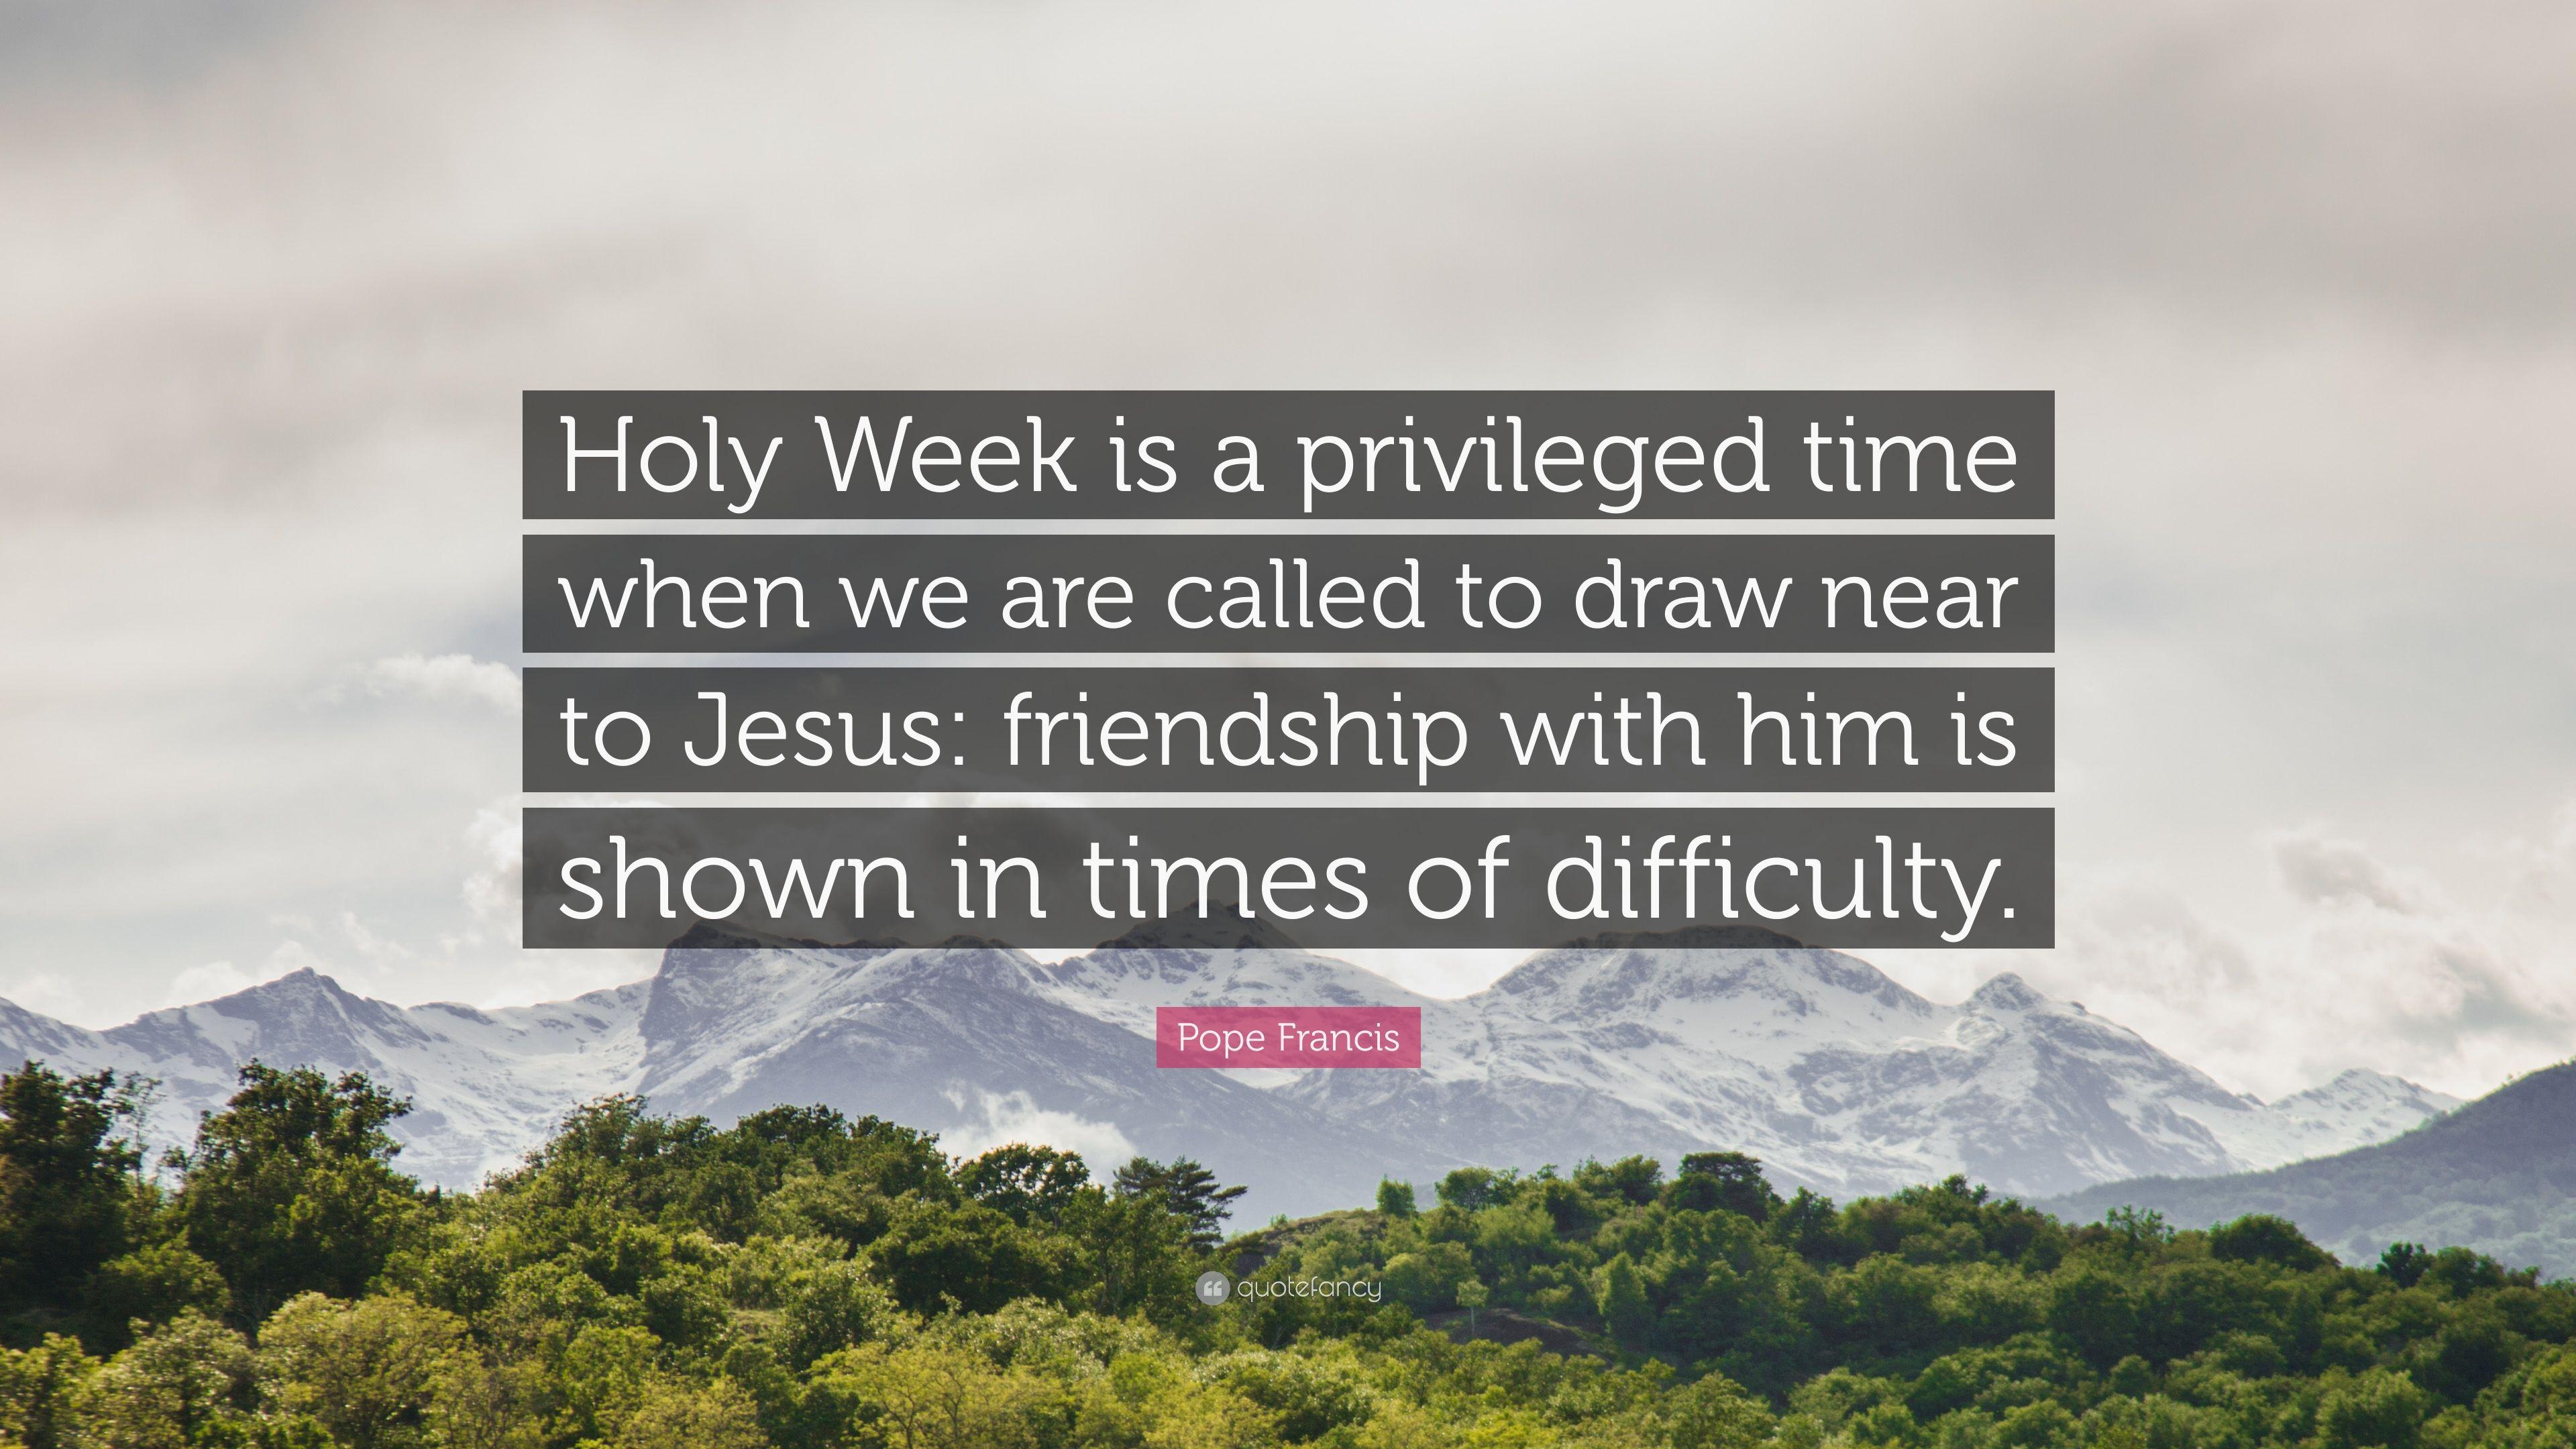 Pope Francis Quote: “Holy Week is a privileged time when we are